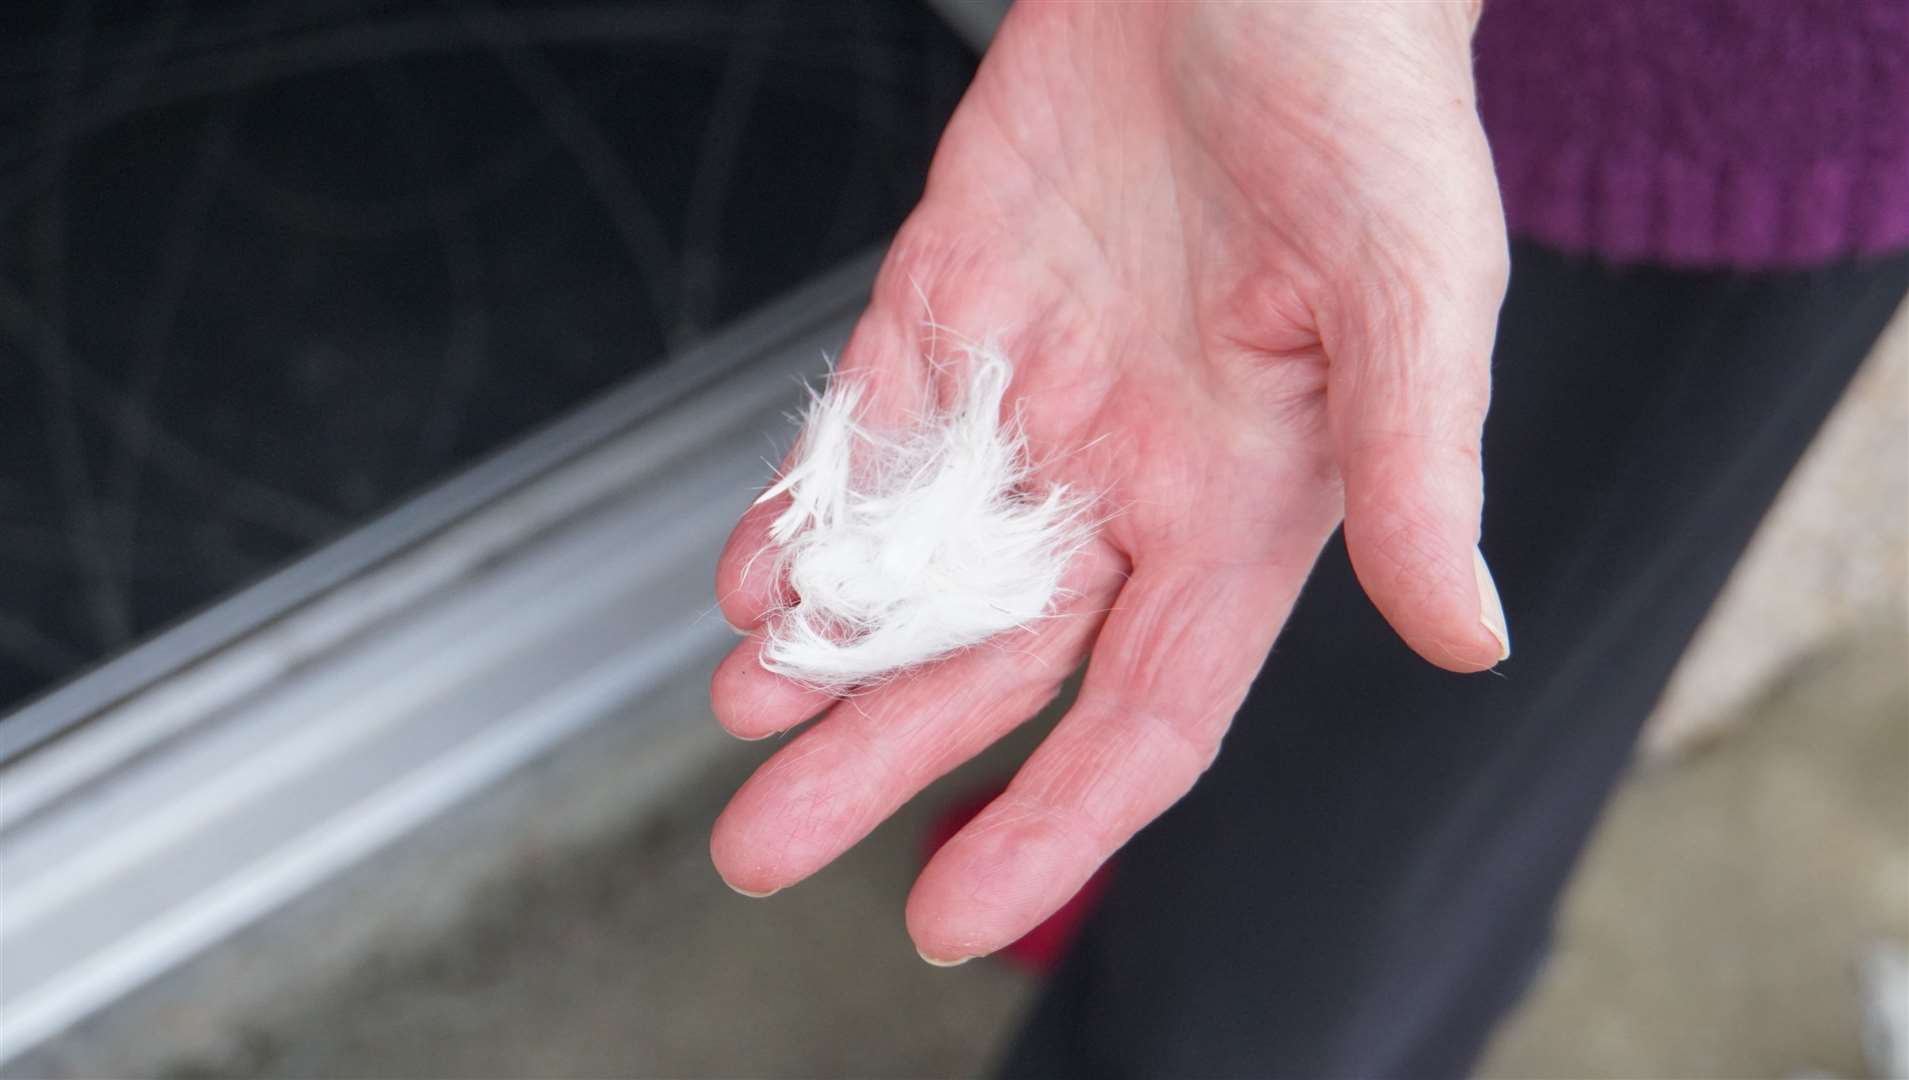 Cecilia Robertson shows fur left behind after her cat Scraich was killed. It was lying in her garden a week after the violent attack and death of her cat.